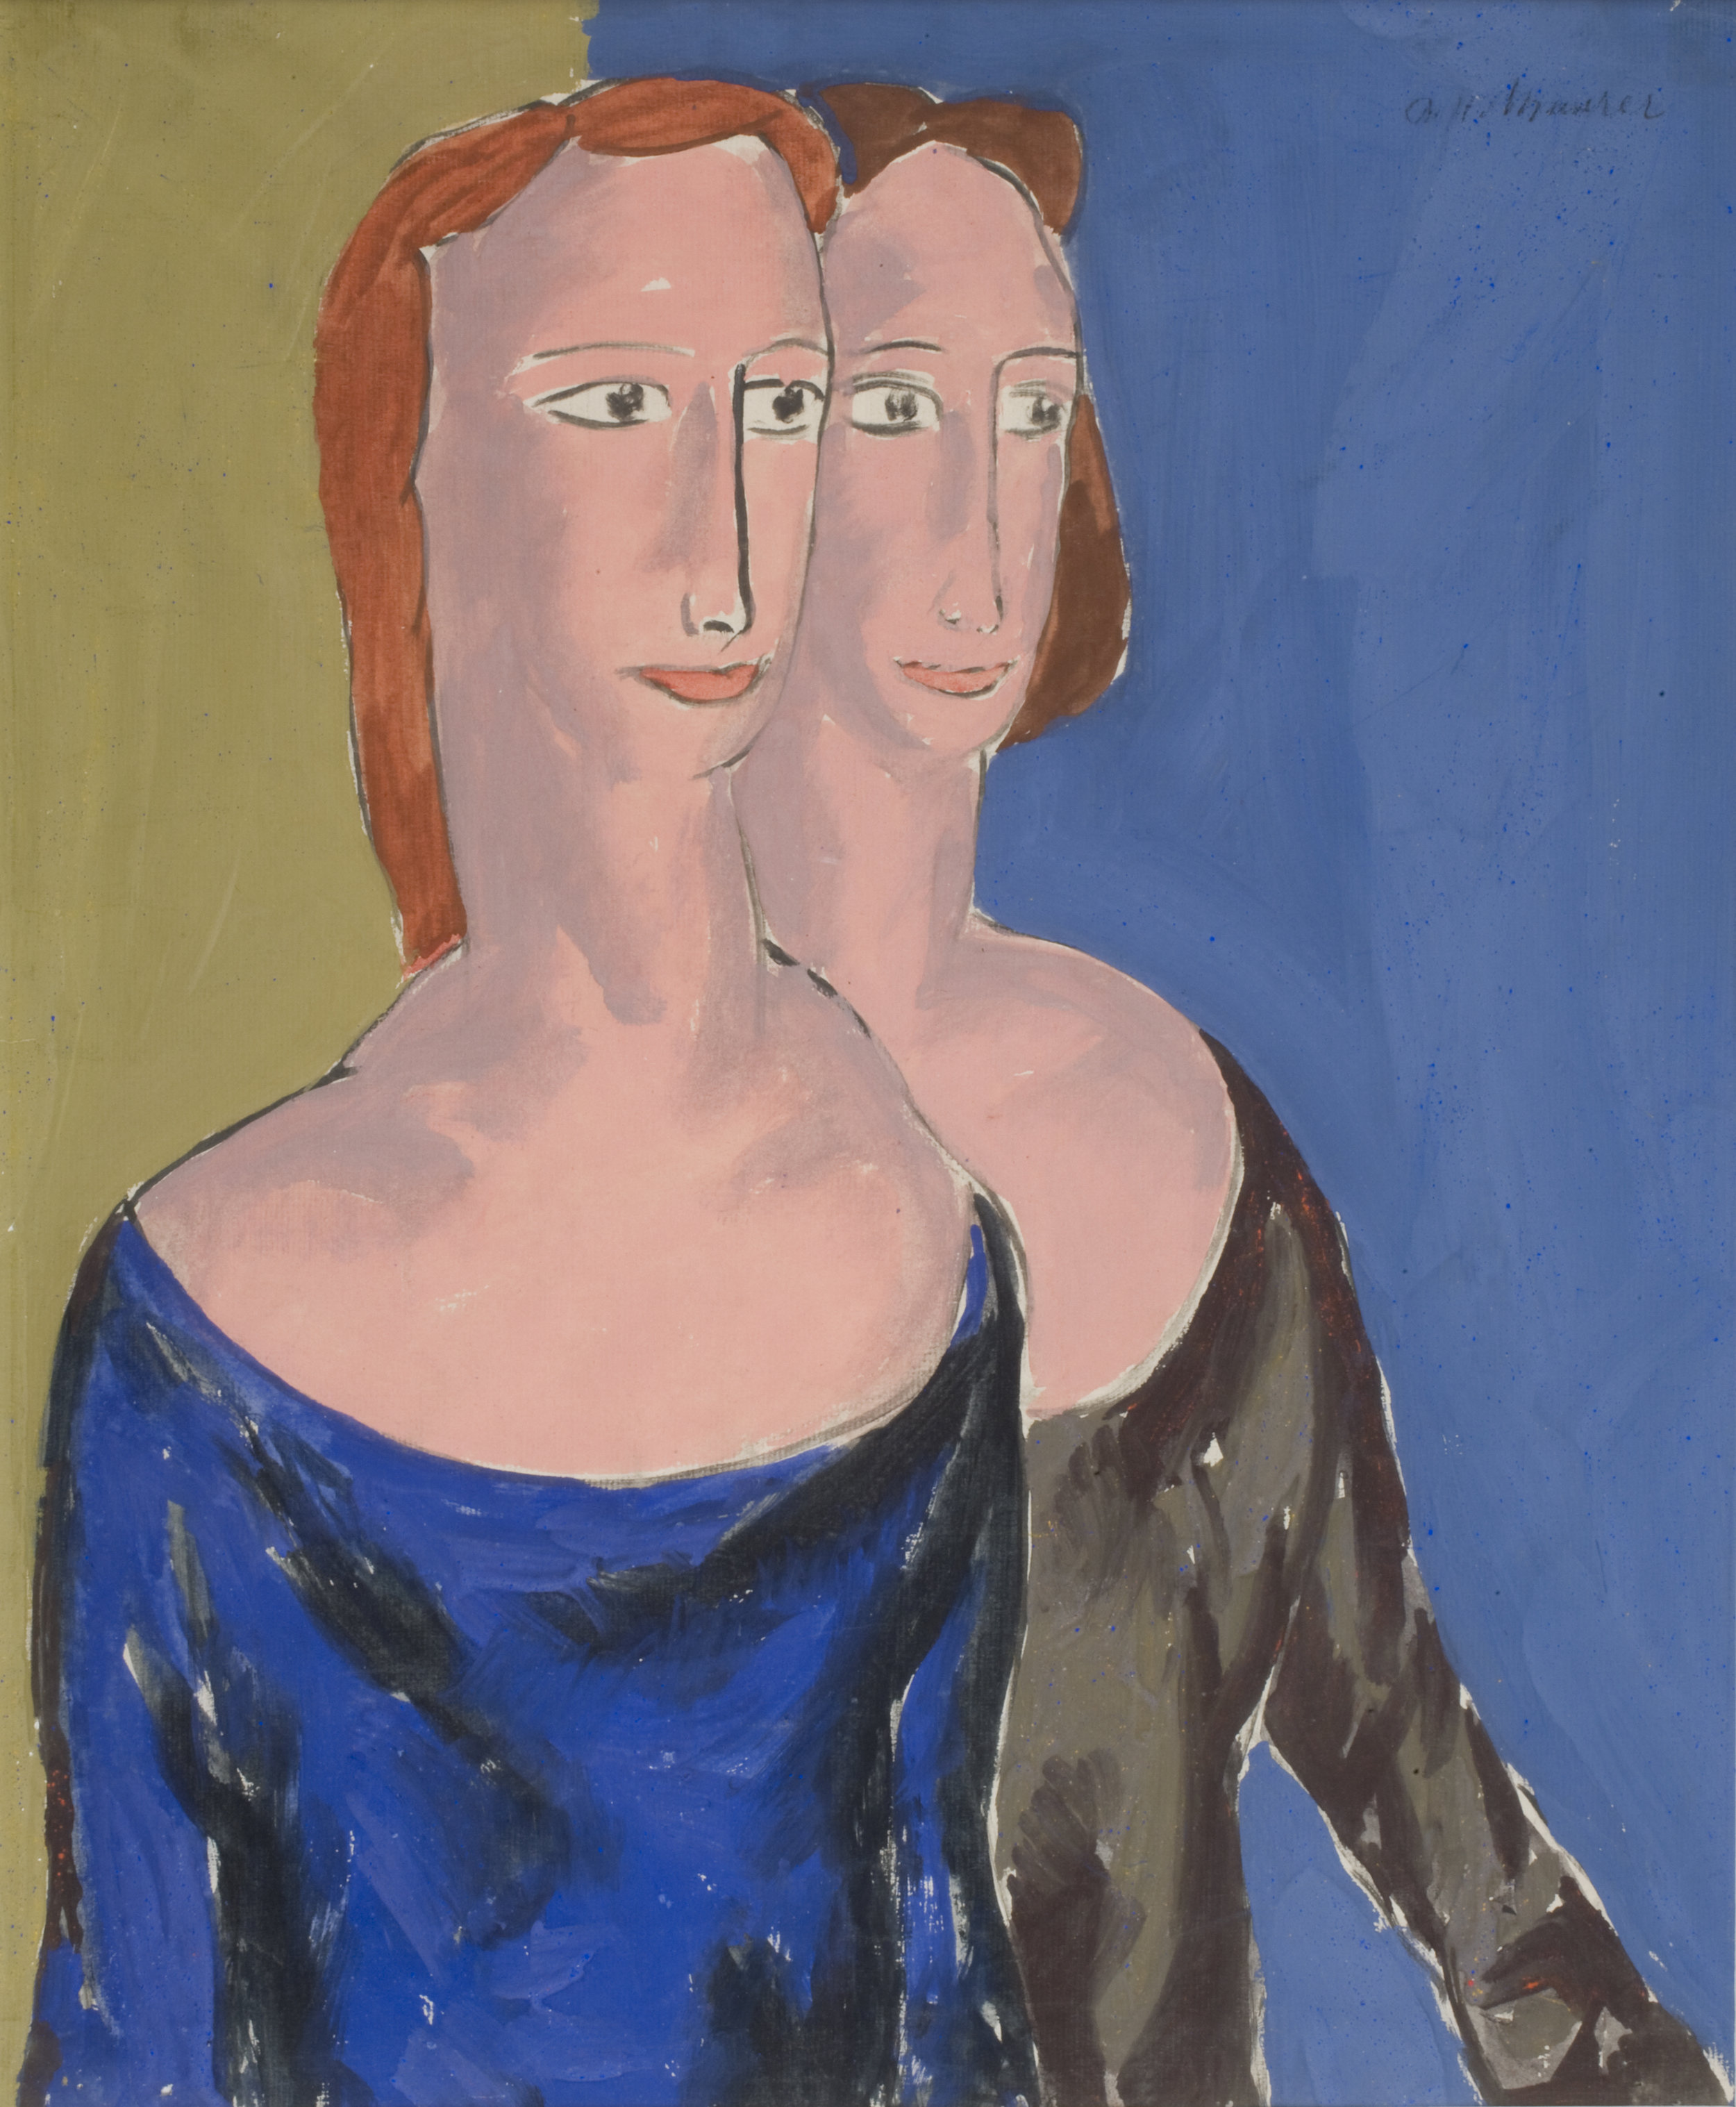 Painting of two women with red hair overlapping, one wearing a blue dress and one wearing a black dress. Green background on left, blue on left.